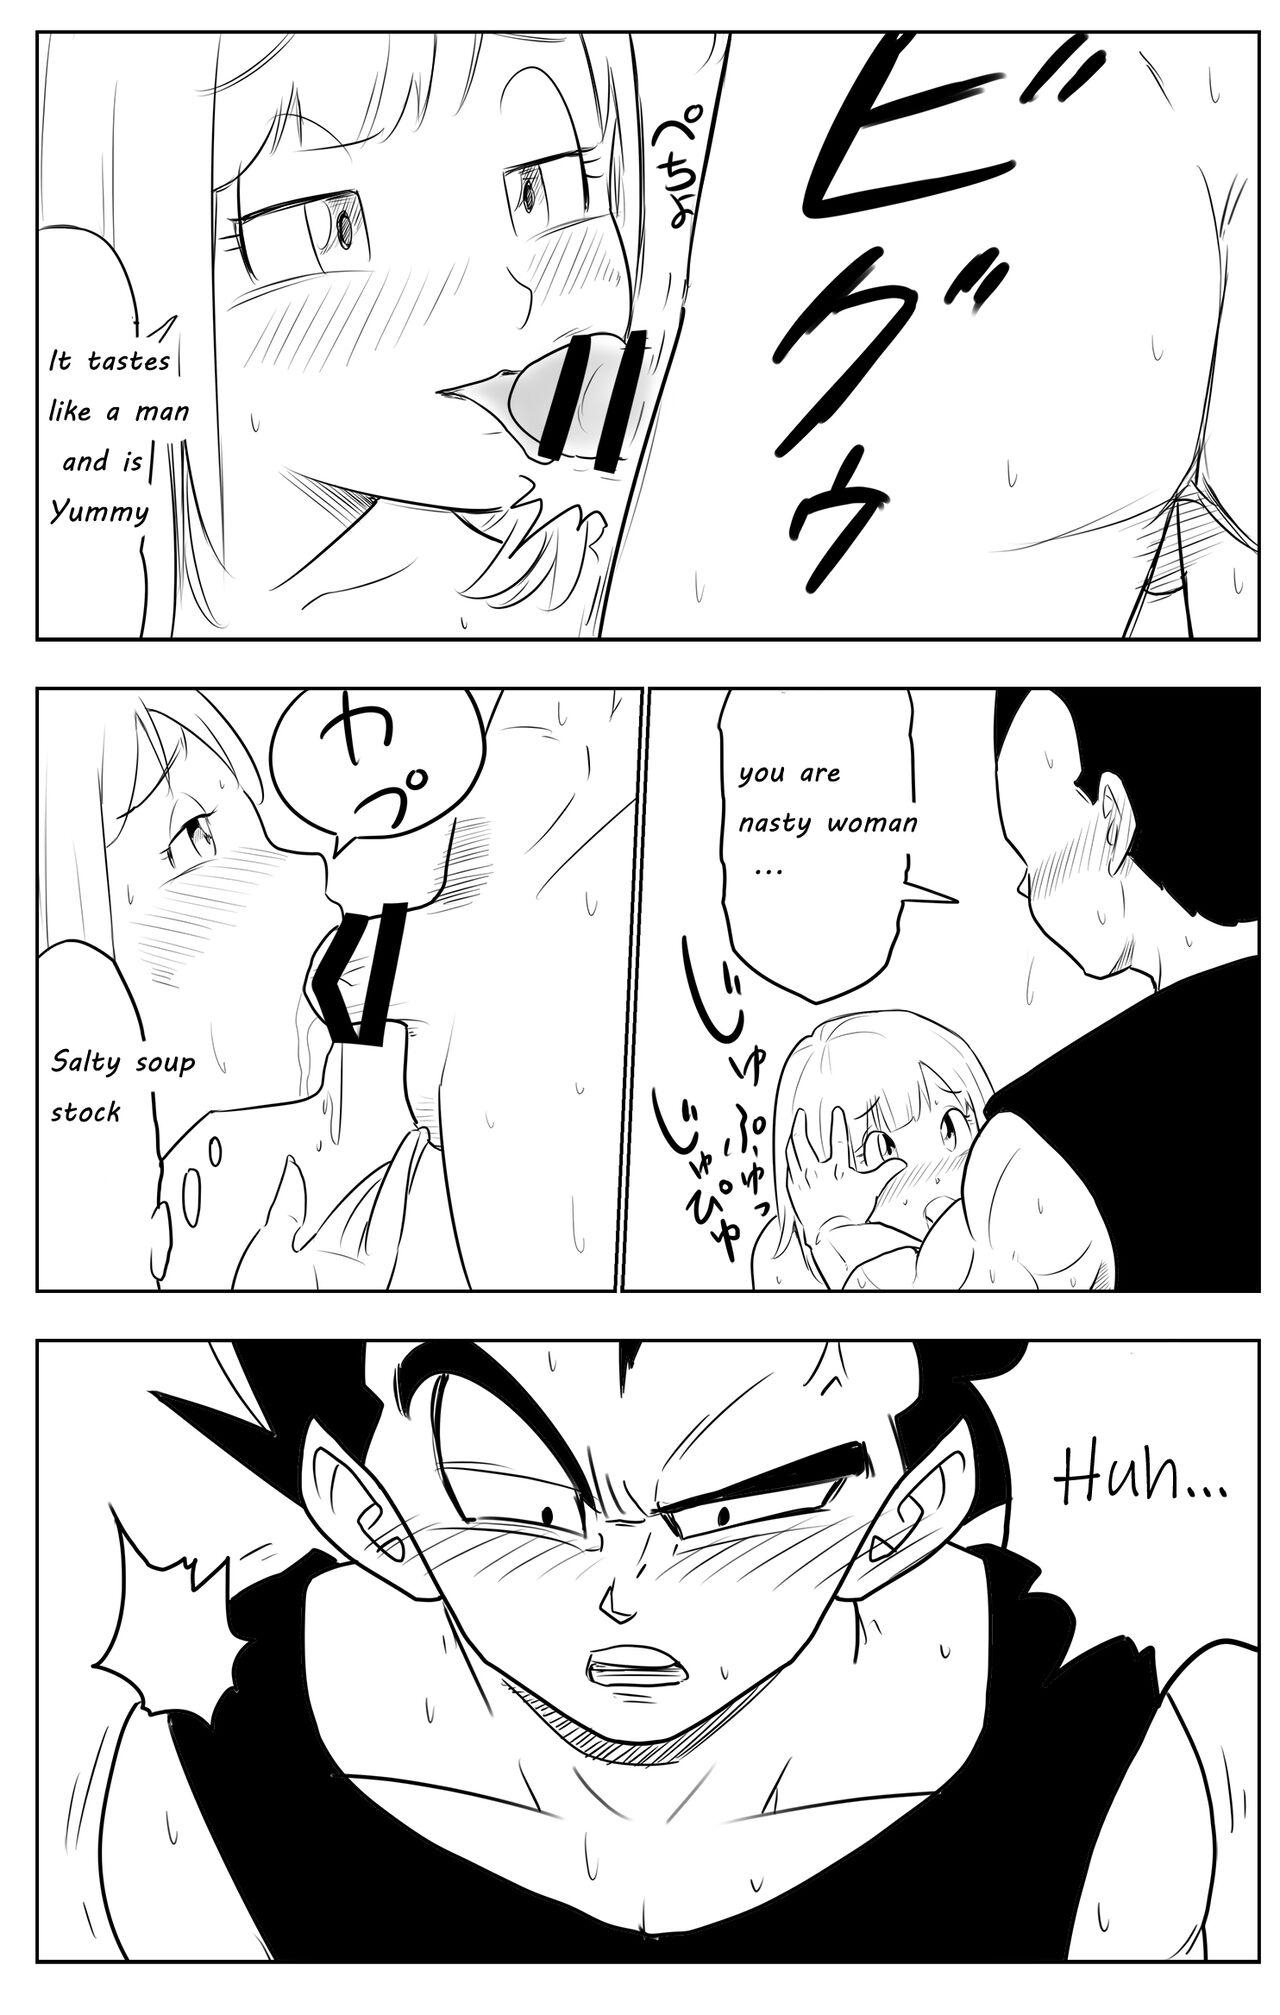 Homemade Night Training - Dragon ball z Breasts - Page 4